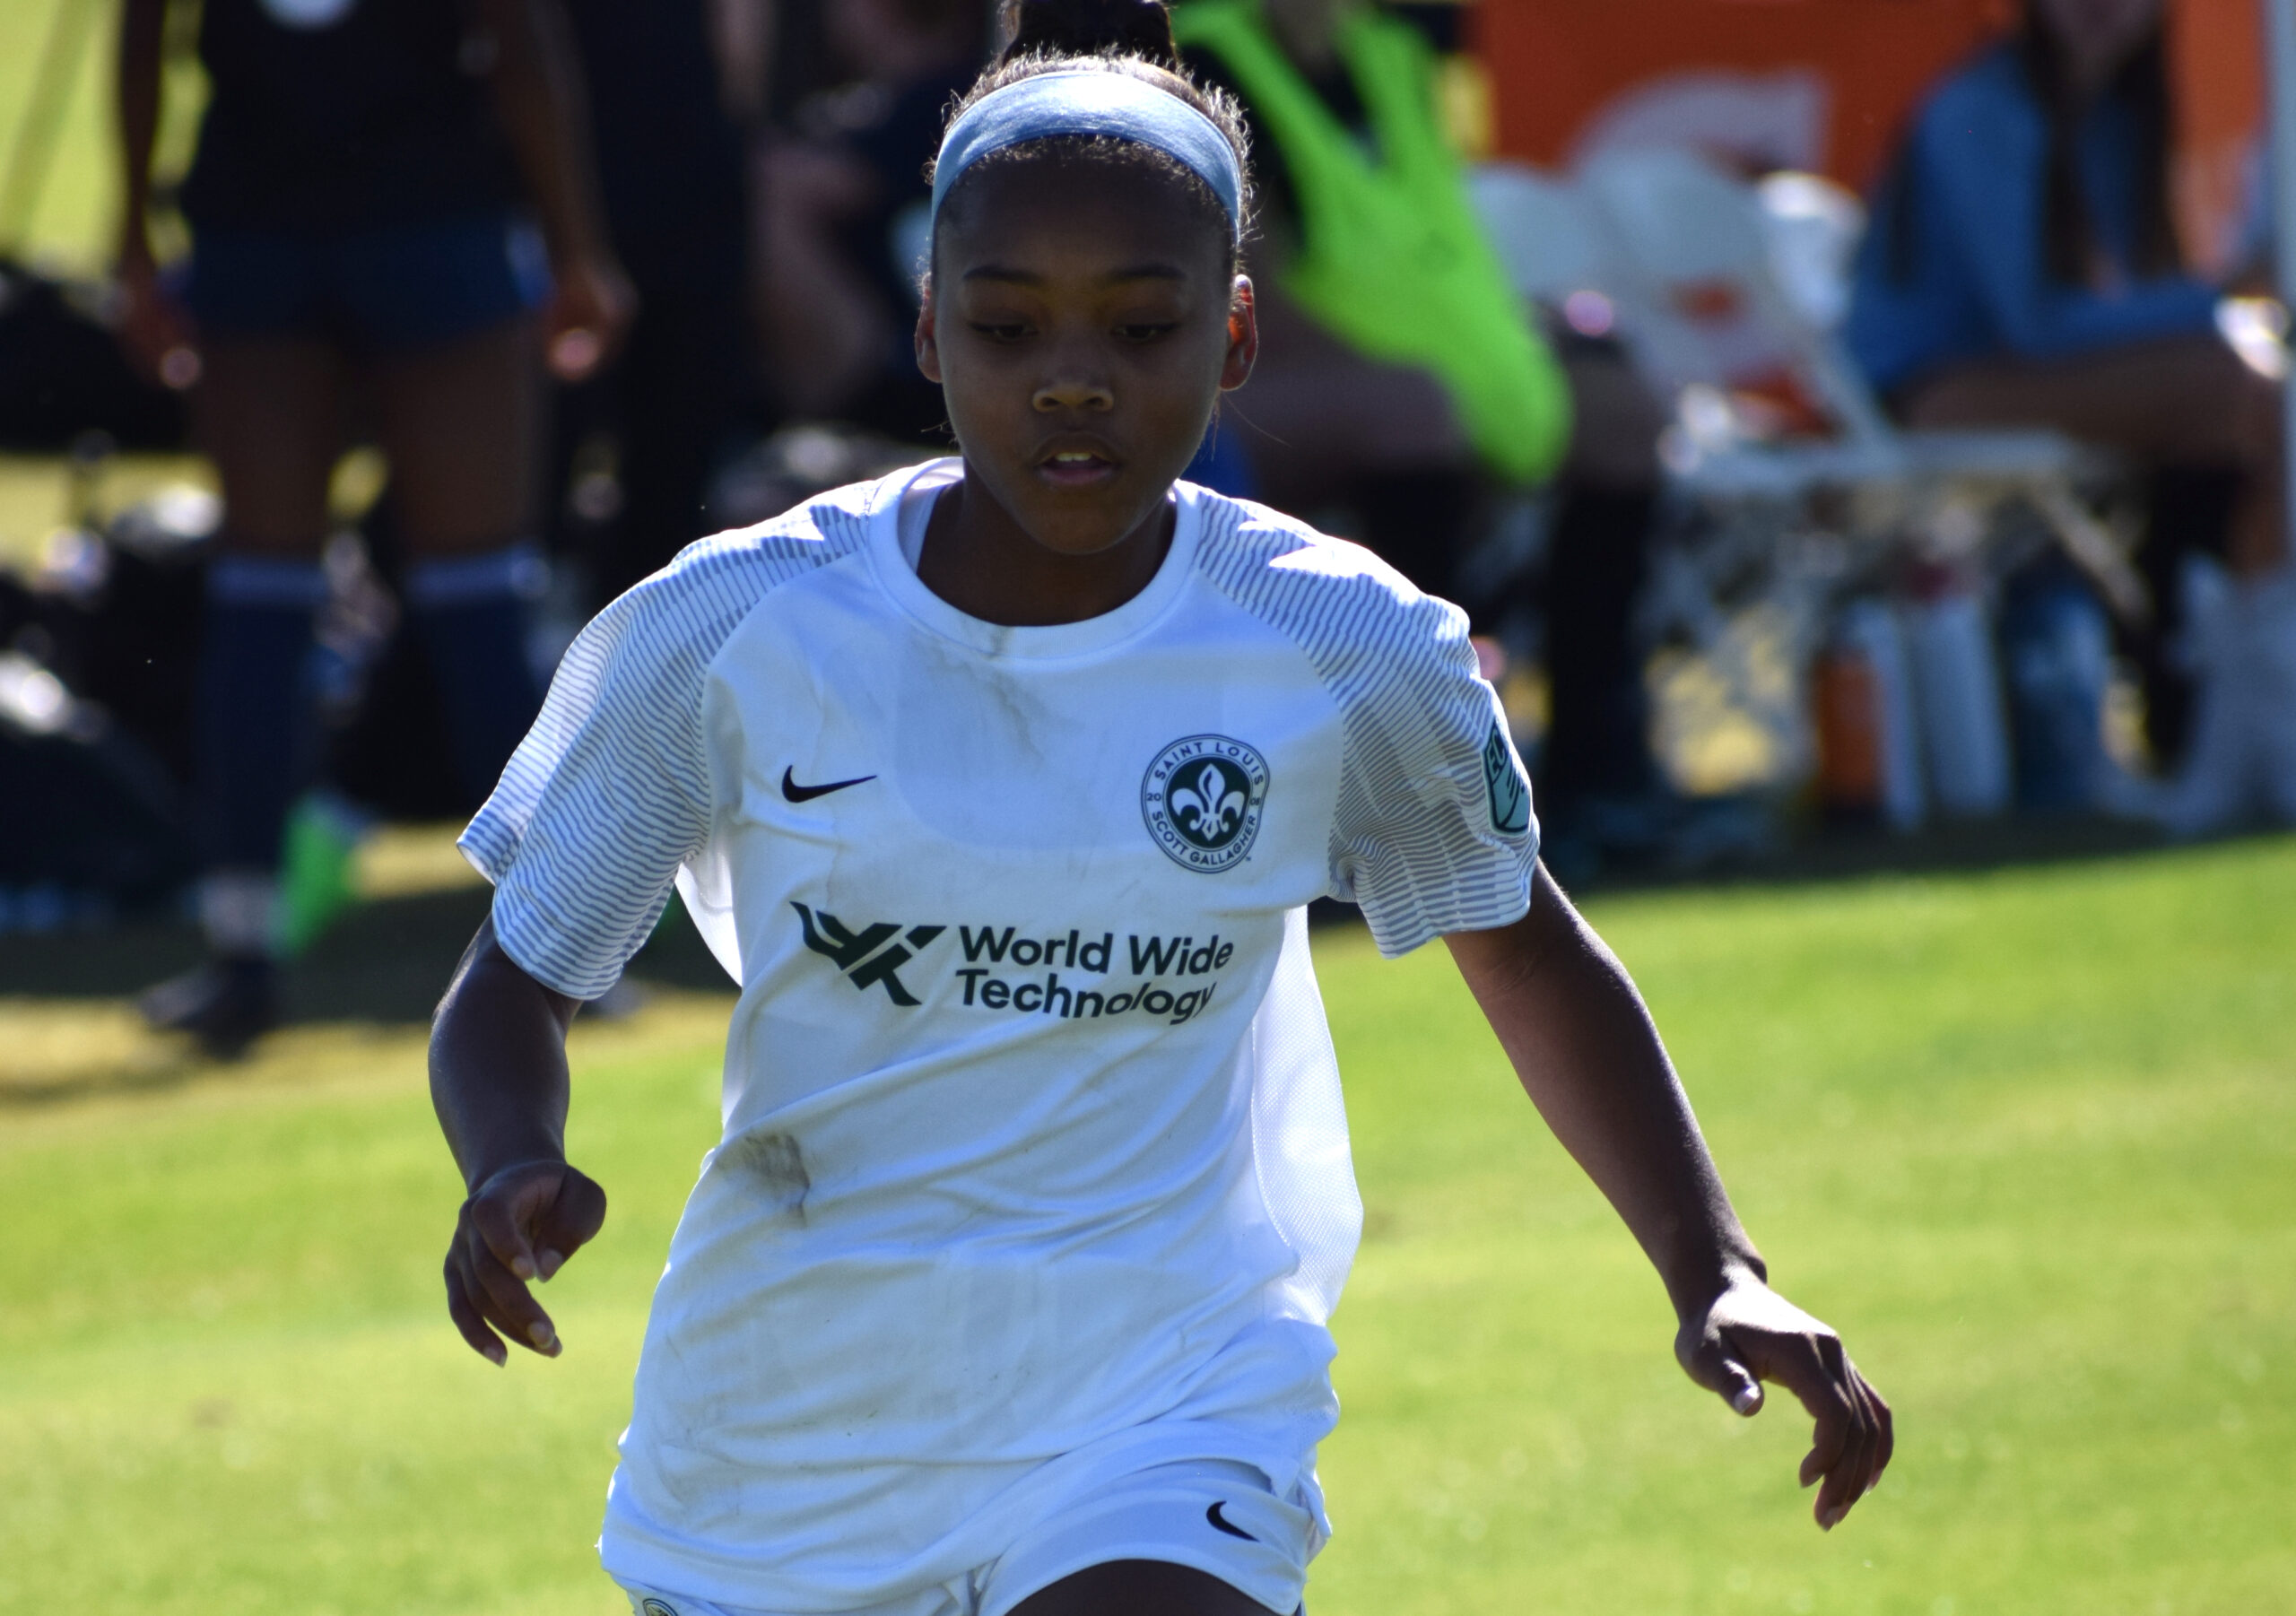 ECNL Phoenix Best performances from the Committed 2024s Prep Soccer